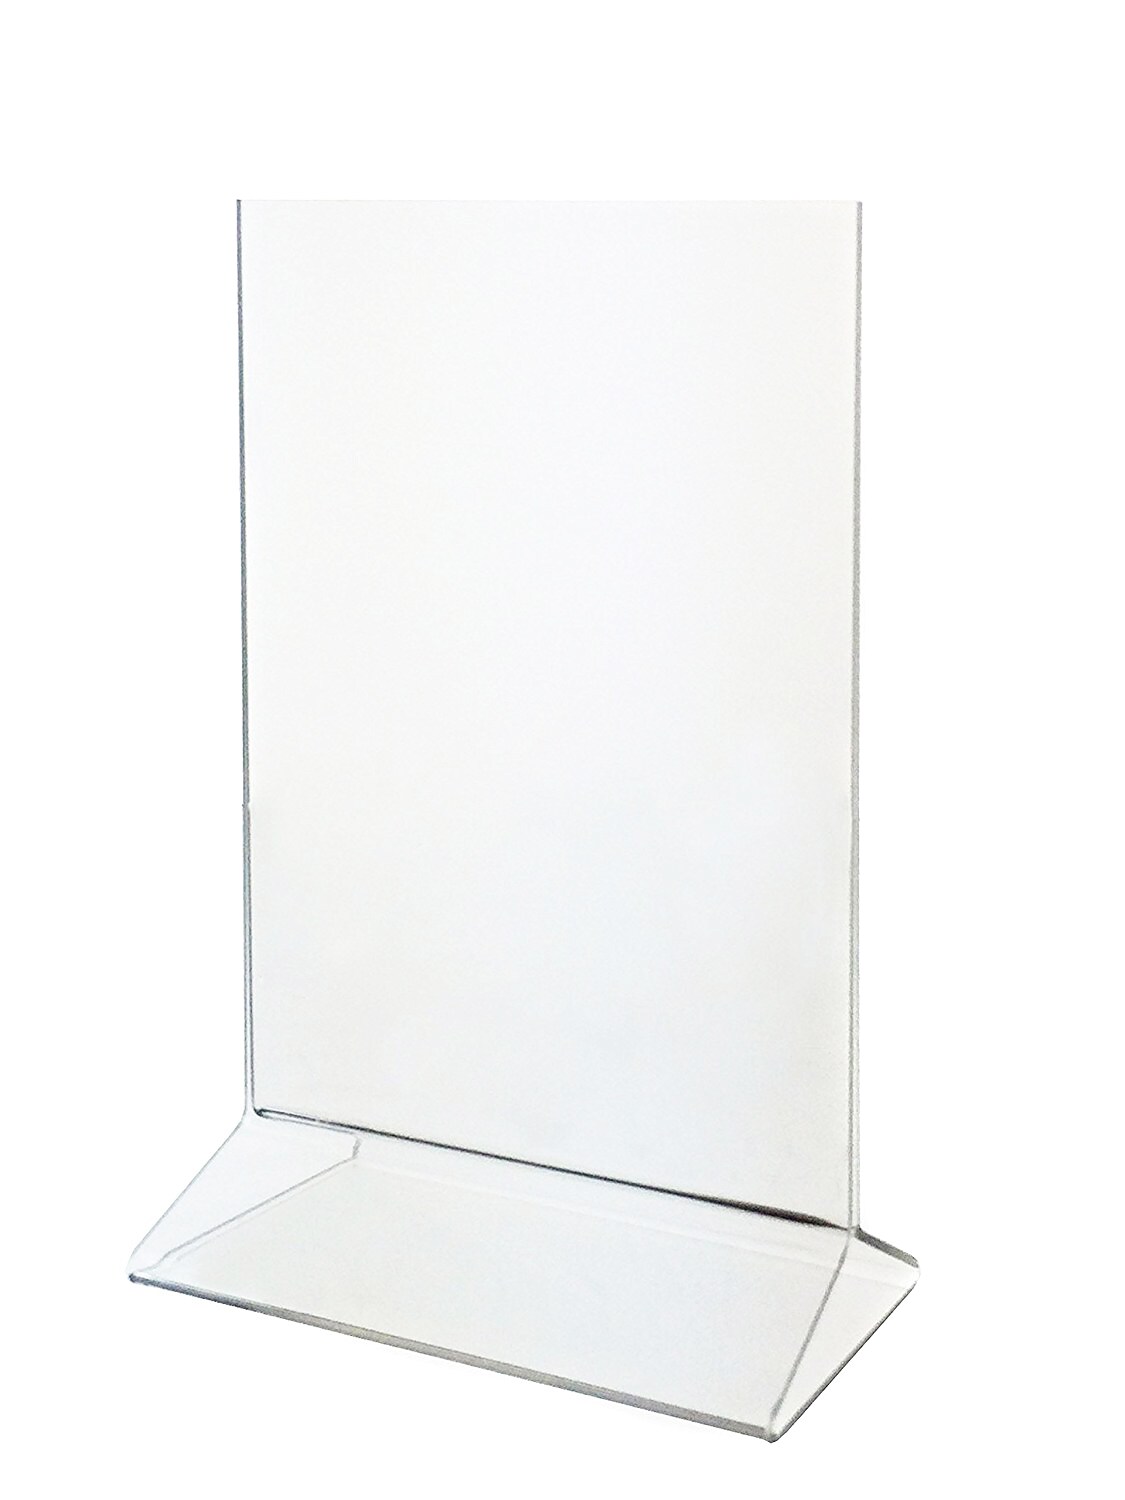 Acrylic Menu Holder Display Photo Frame Which Is Safe Multi Use Wipe Clean 